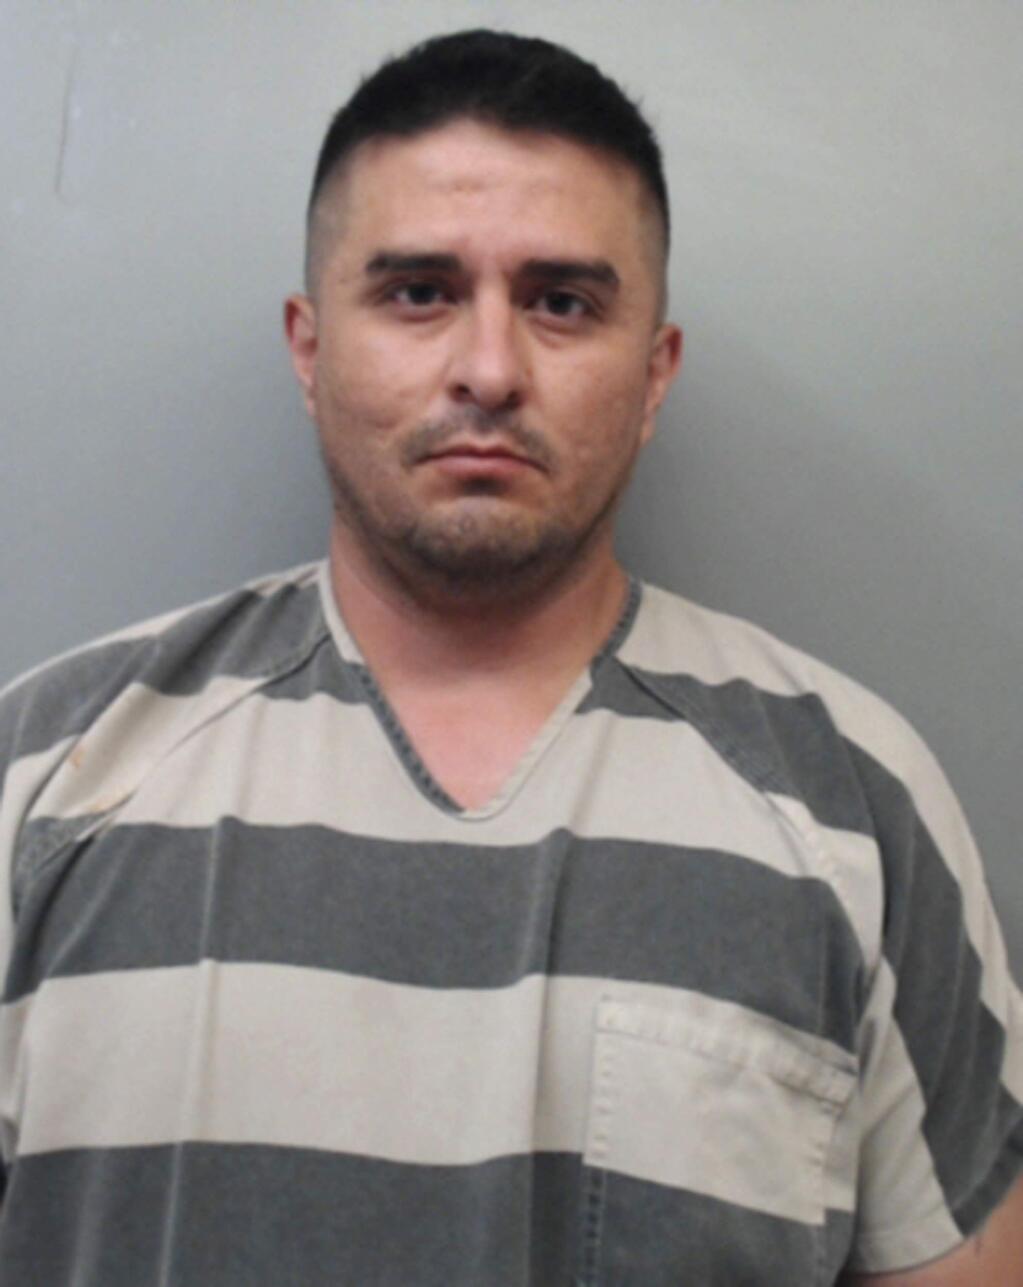 This image provided by the Webb County Sheriff's Office shows Juan David Ortiz, a U.S. Border Patrol supervisor who was jailed Sunday, Sept. 16, 2018, on a $2.5 million bond in Texas, accused in the killing of at least four women. Ortiz was nabbed early Saturday after a string of violence against female sex workers in Laredo, Texas, where he is a supervisor with the Border Patrol. (Webb County Sheriff's Office via AP)